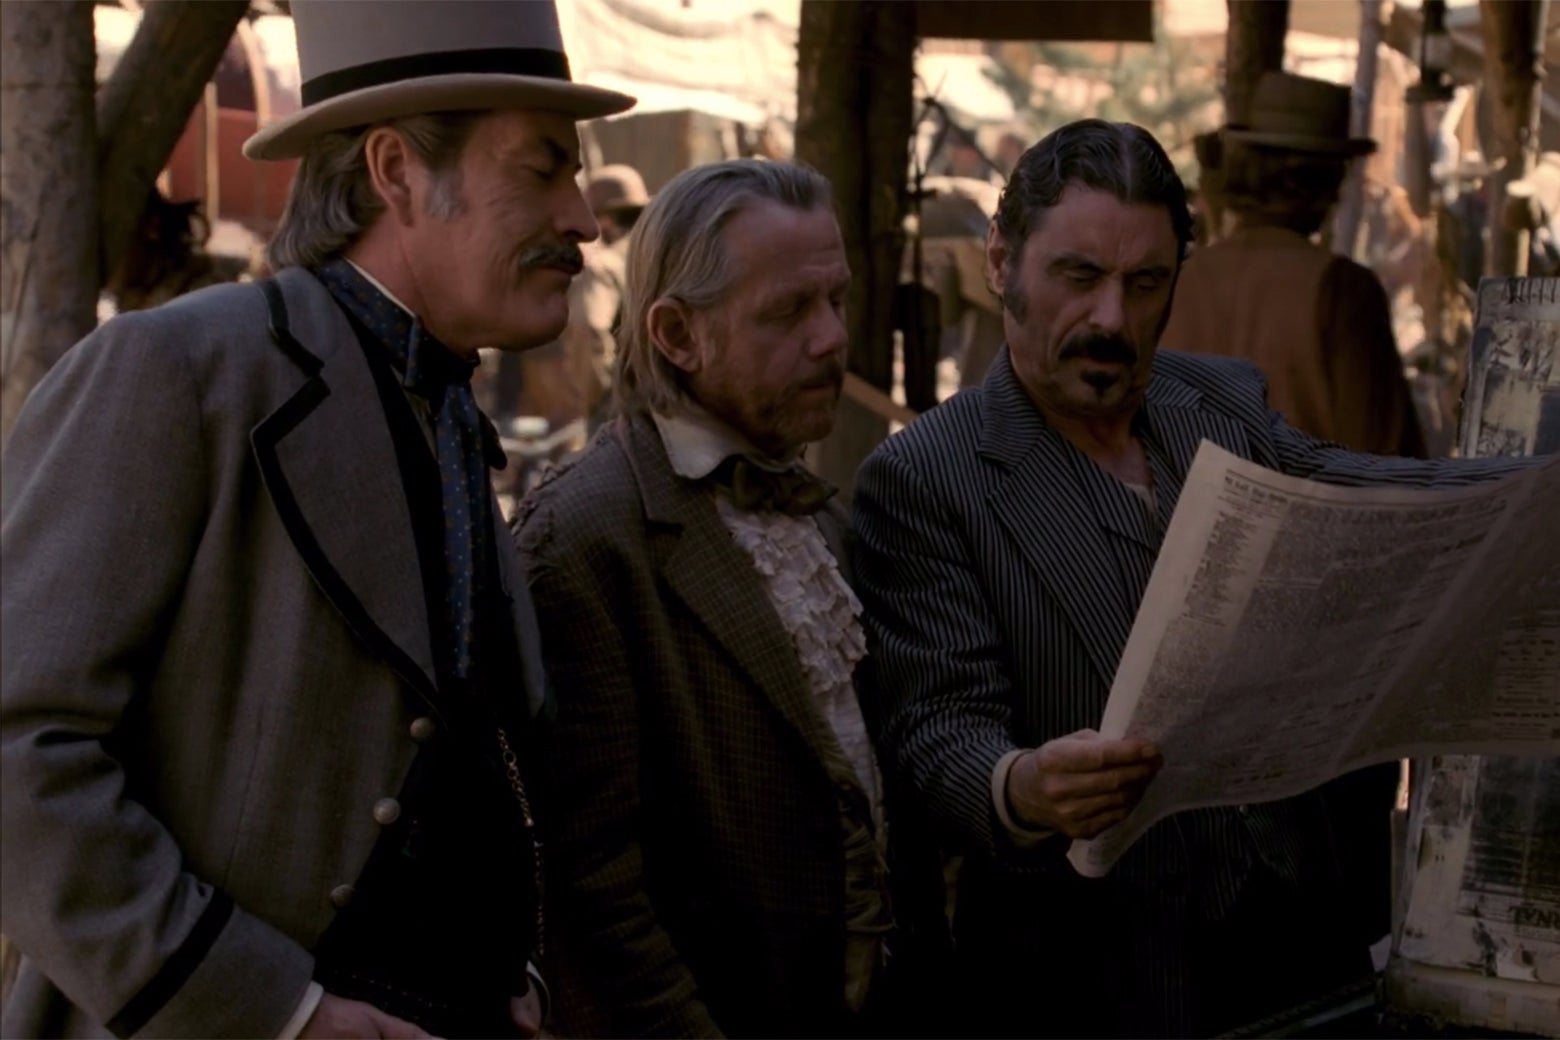 Cy Tolliver (Powers Boothe), E.B. Farnum (William Sanderson), and Al Swearengen (Ian McShane) read a copy of the Black Hills Weekly Pioneer in a still from Deadwood.